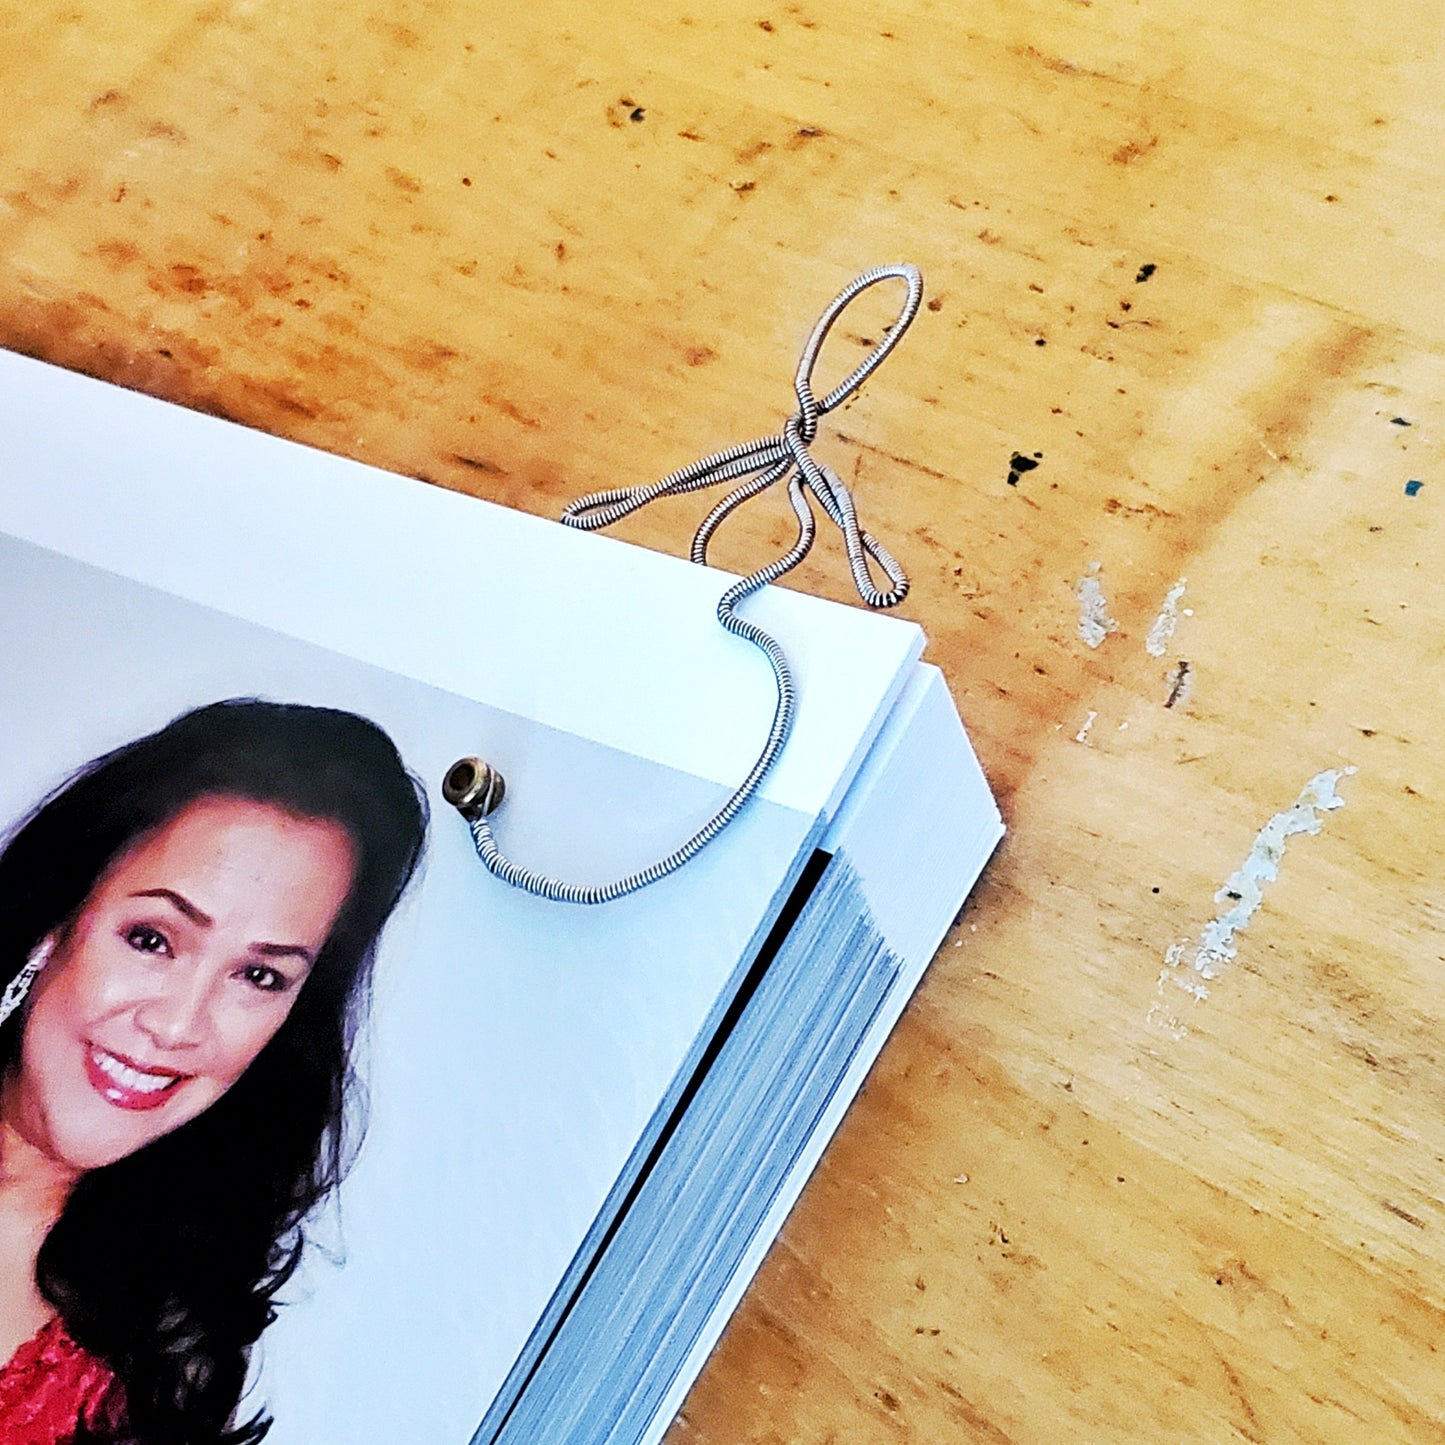 bookmark in the shape of a woman's form - made from an upcycled guitar string it is hooked onto the corner of a page from a book on which we can see the face of a woman with long dark hair who is smiling